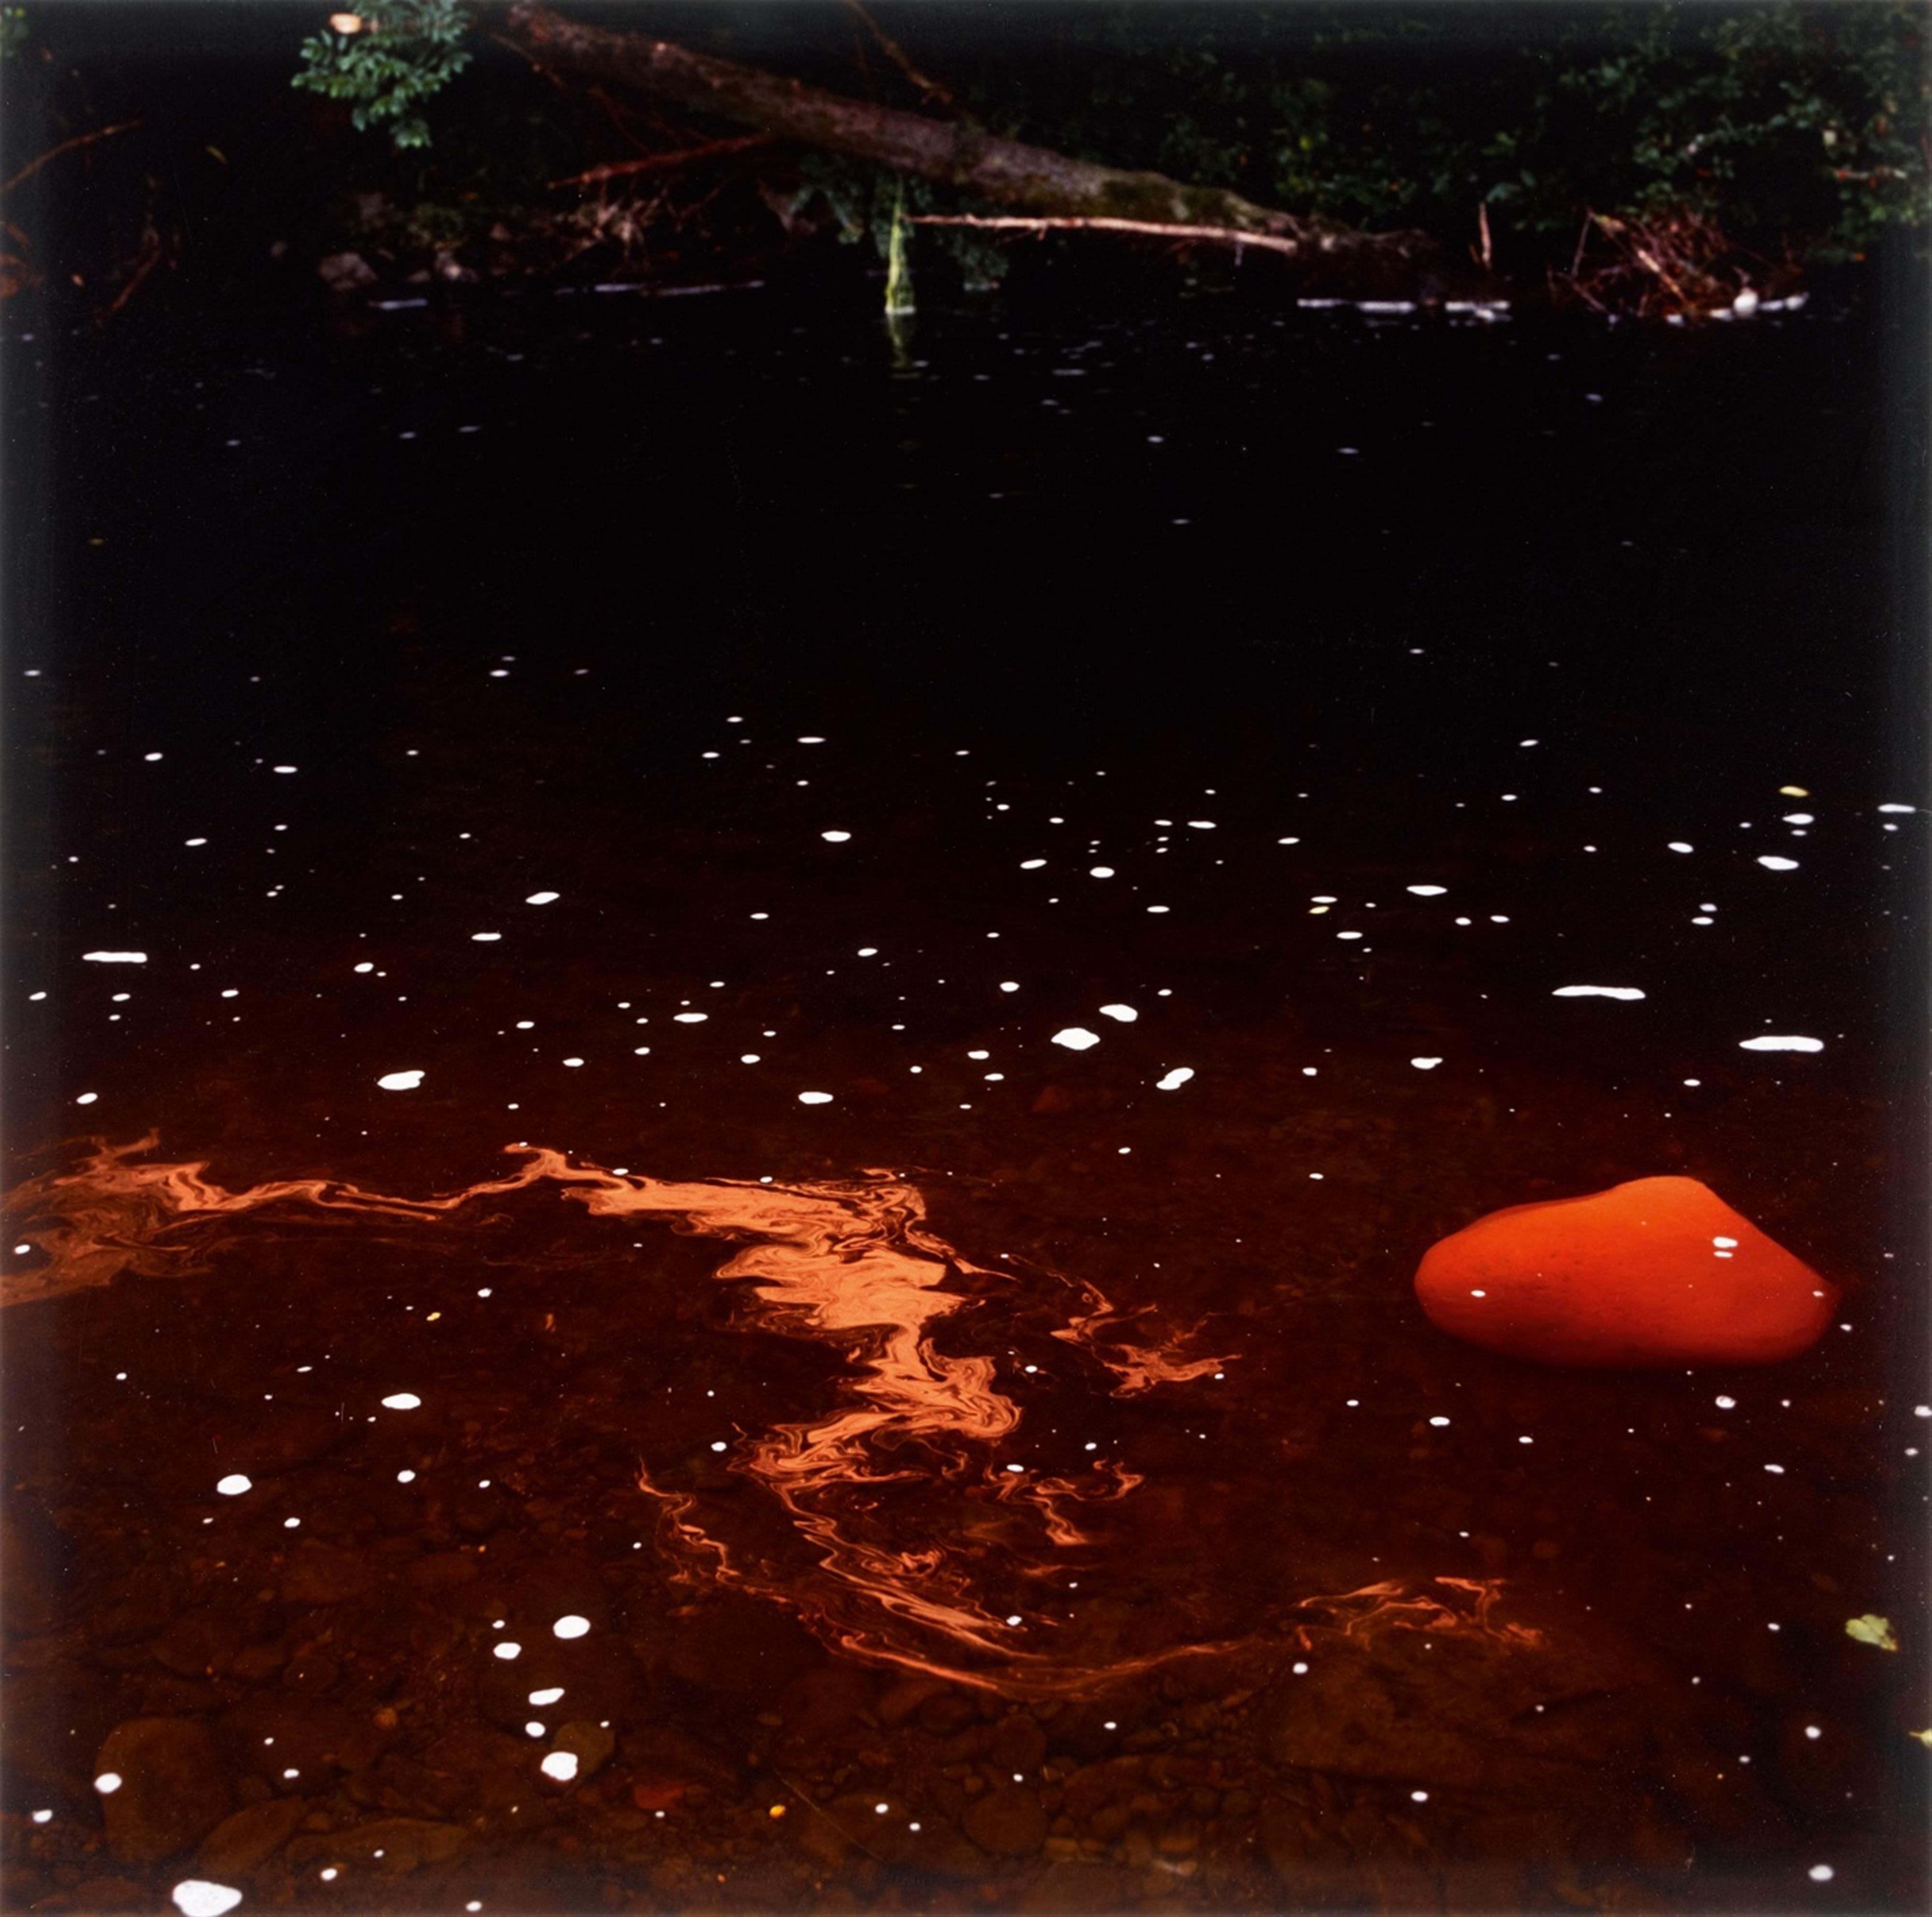 Andy Goldsworthy - River Rock, drawn over with a soft red stone, Scaur Water, Dumfriesshire - image-6